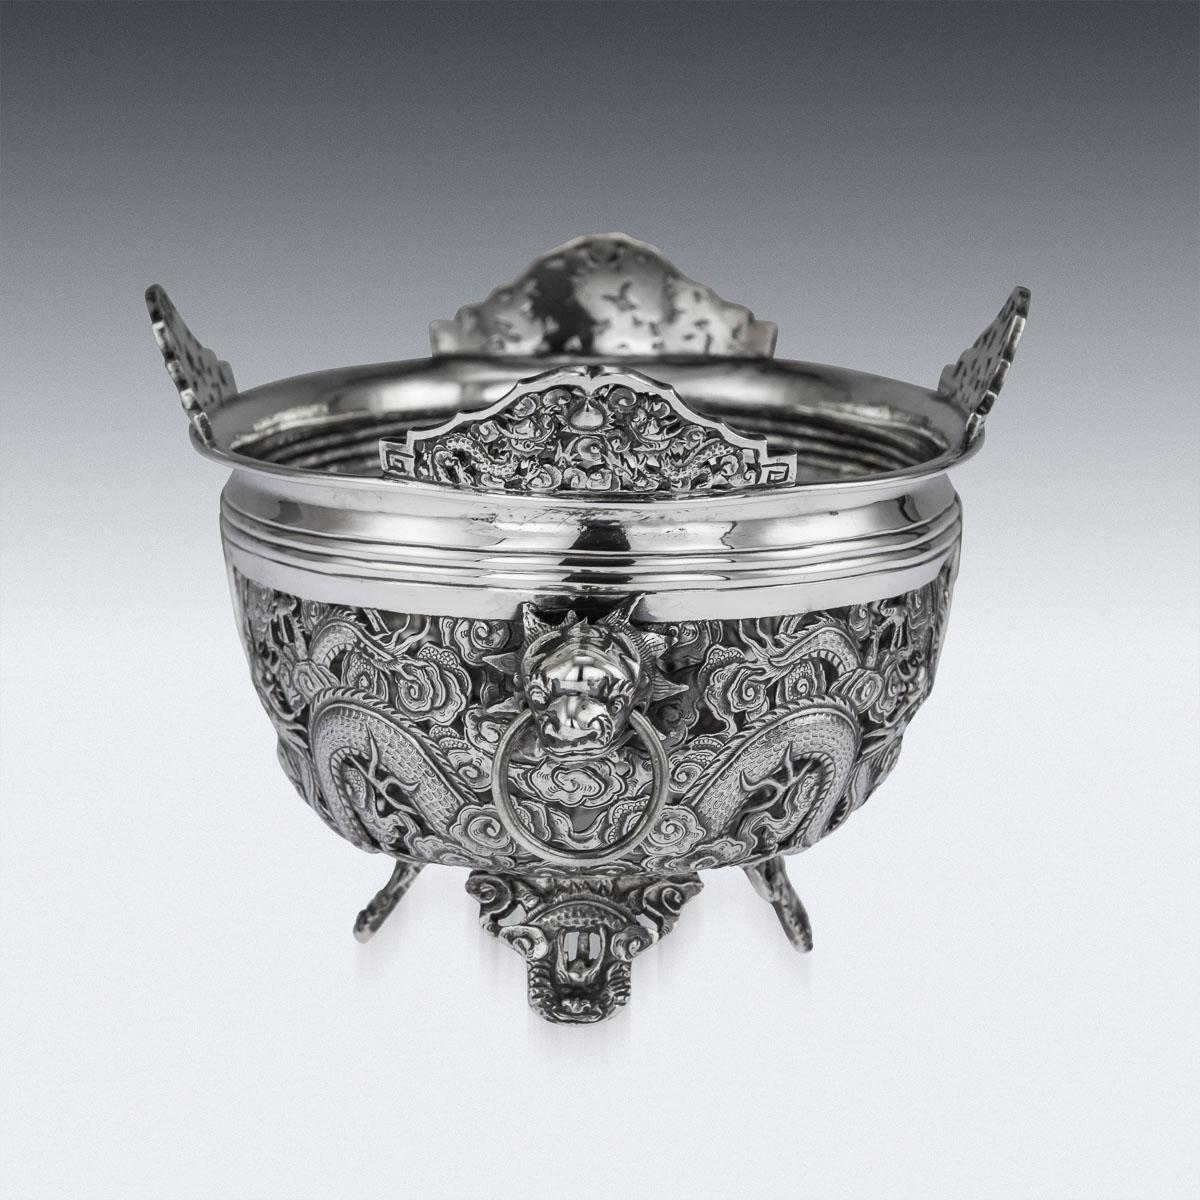 Antique late 19th century Chinese large solid silver jardinière, of oval form, applied with unusual twin dragon head handles with rings in mouth and standing on four coiled dragon feet, shaped top rim and sides decorated with pierced dragons amongst